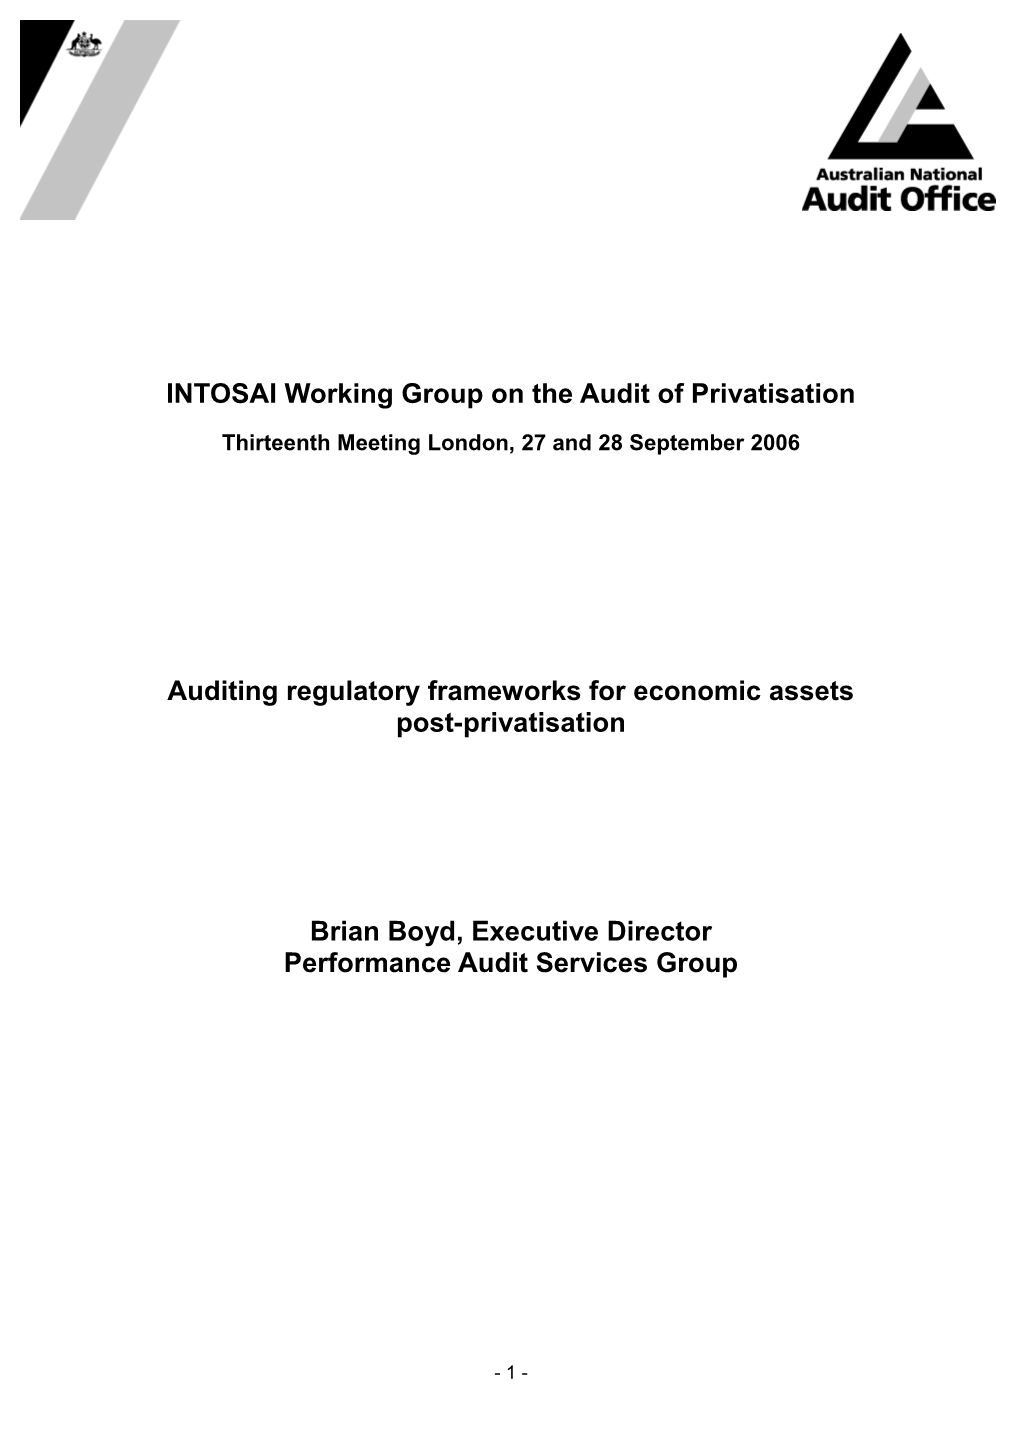 INTOSAI Working Group on the Audit of Privatisation